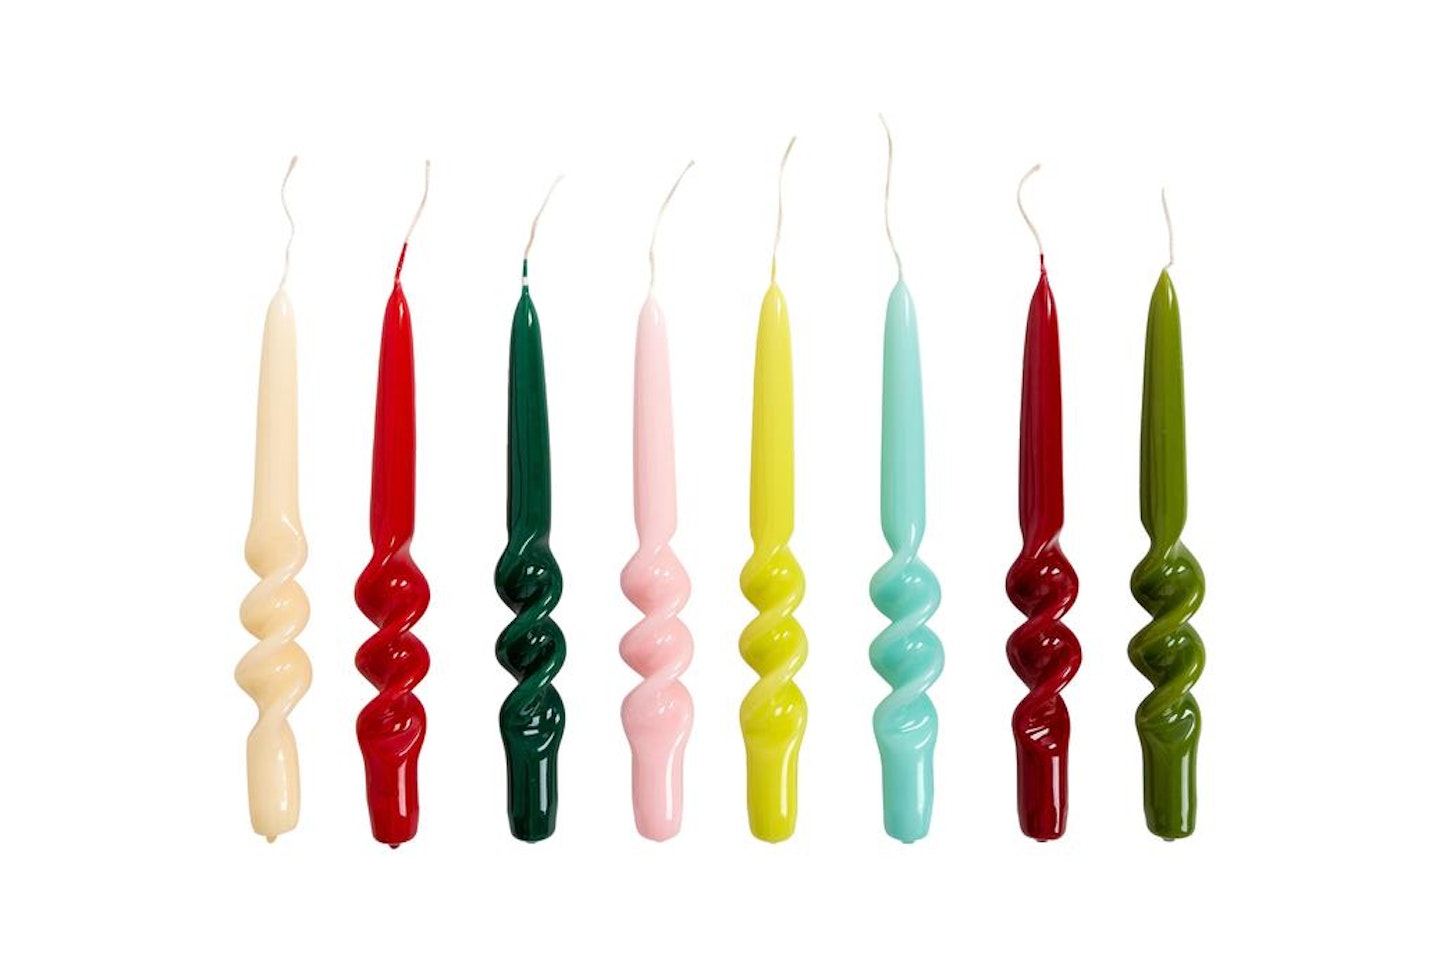 The Edition 94, Swirl Candles 23 cm, £6.00 Each